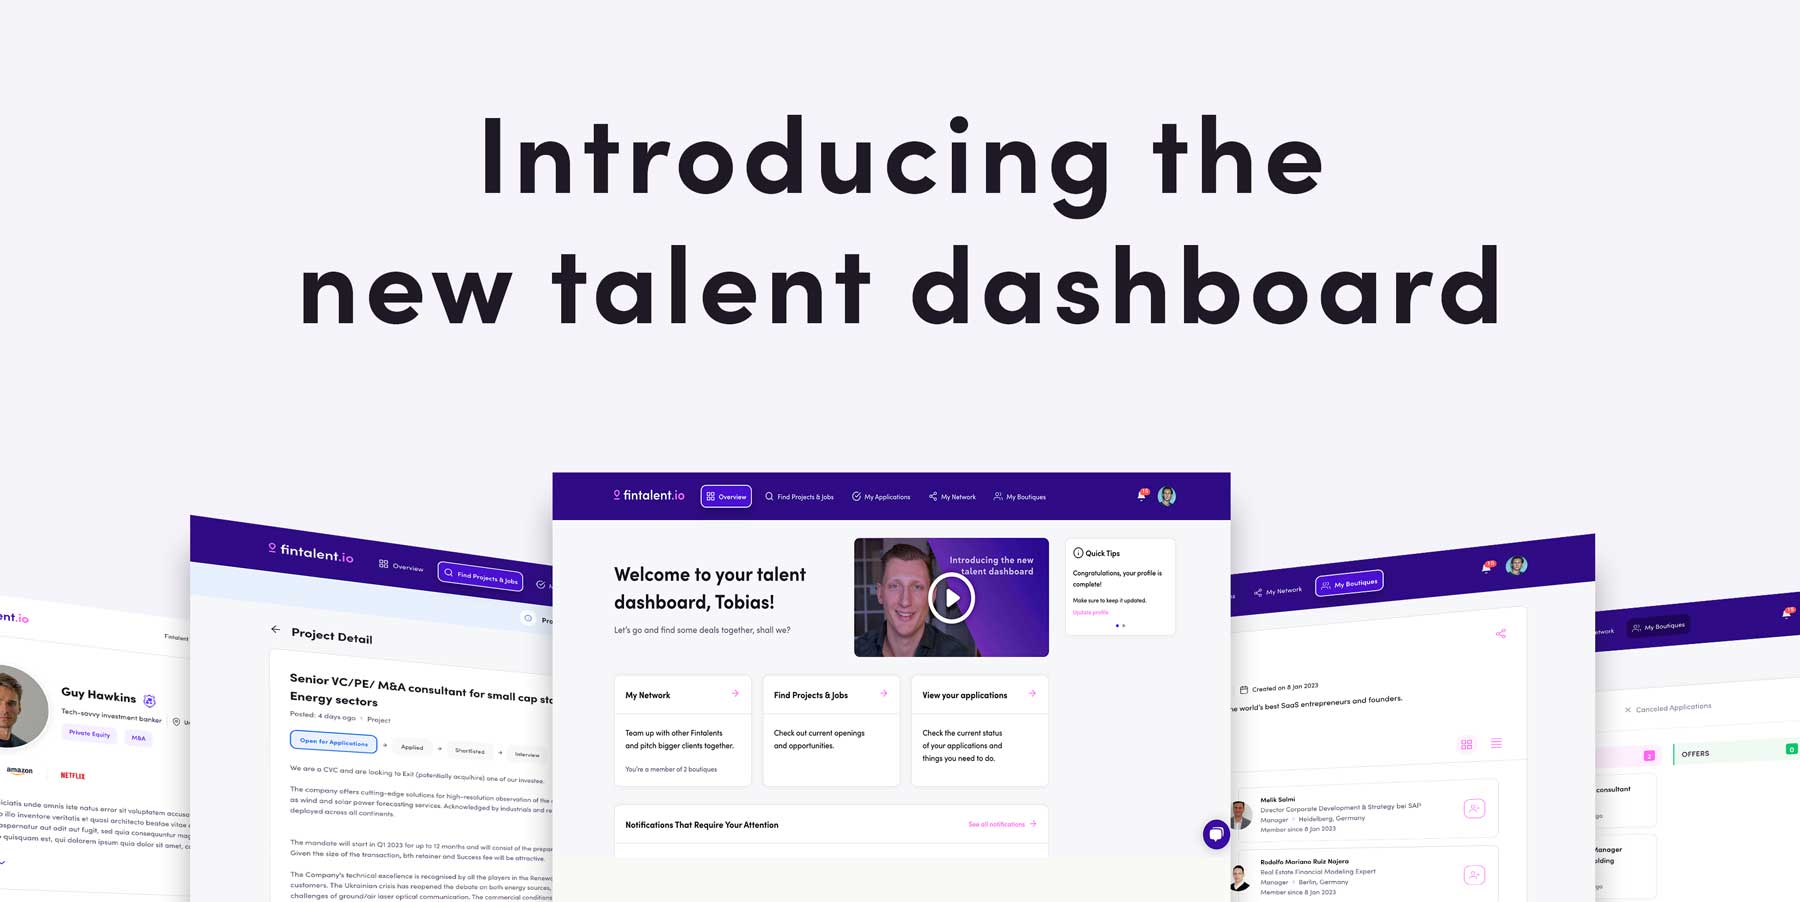 Introducing the new talent dashboard